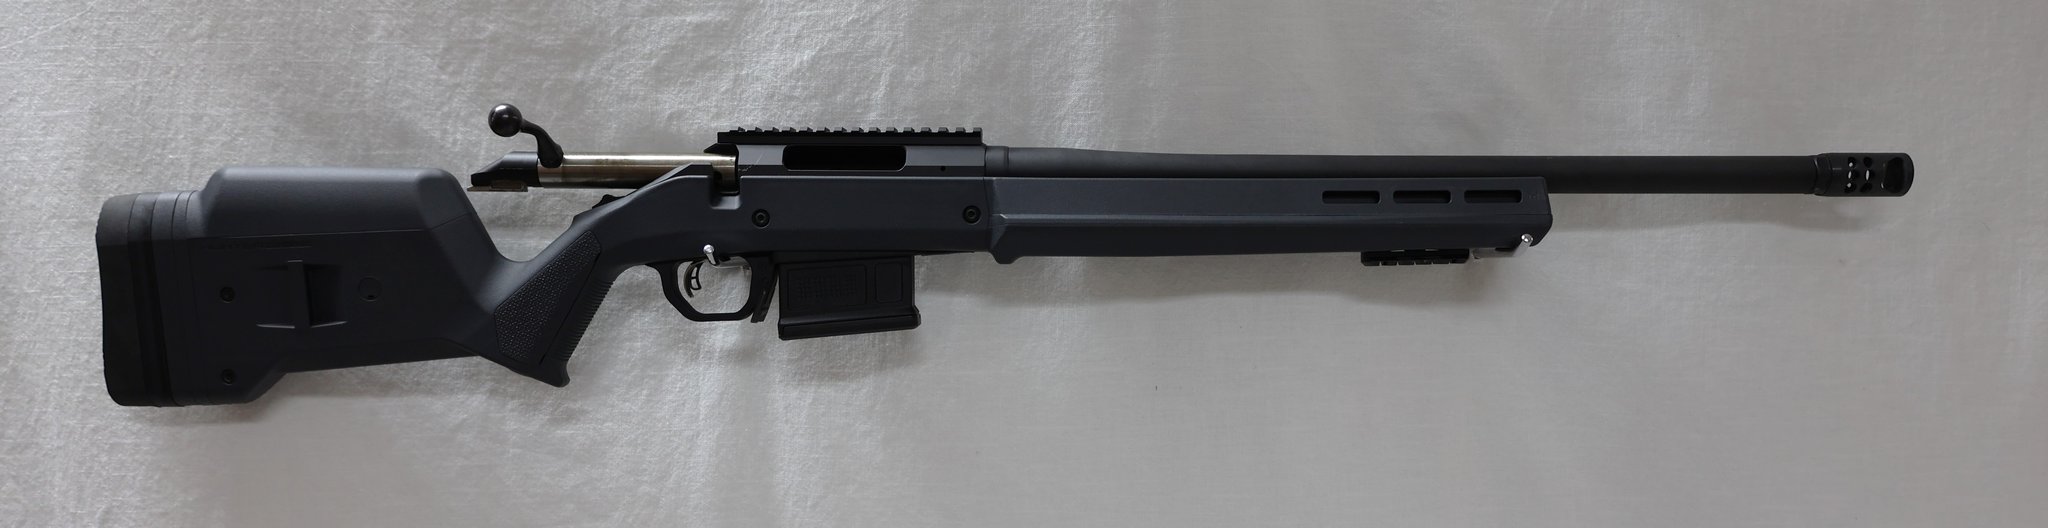 RUGER AMERICAN RIFLE HUNTER